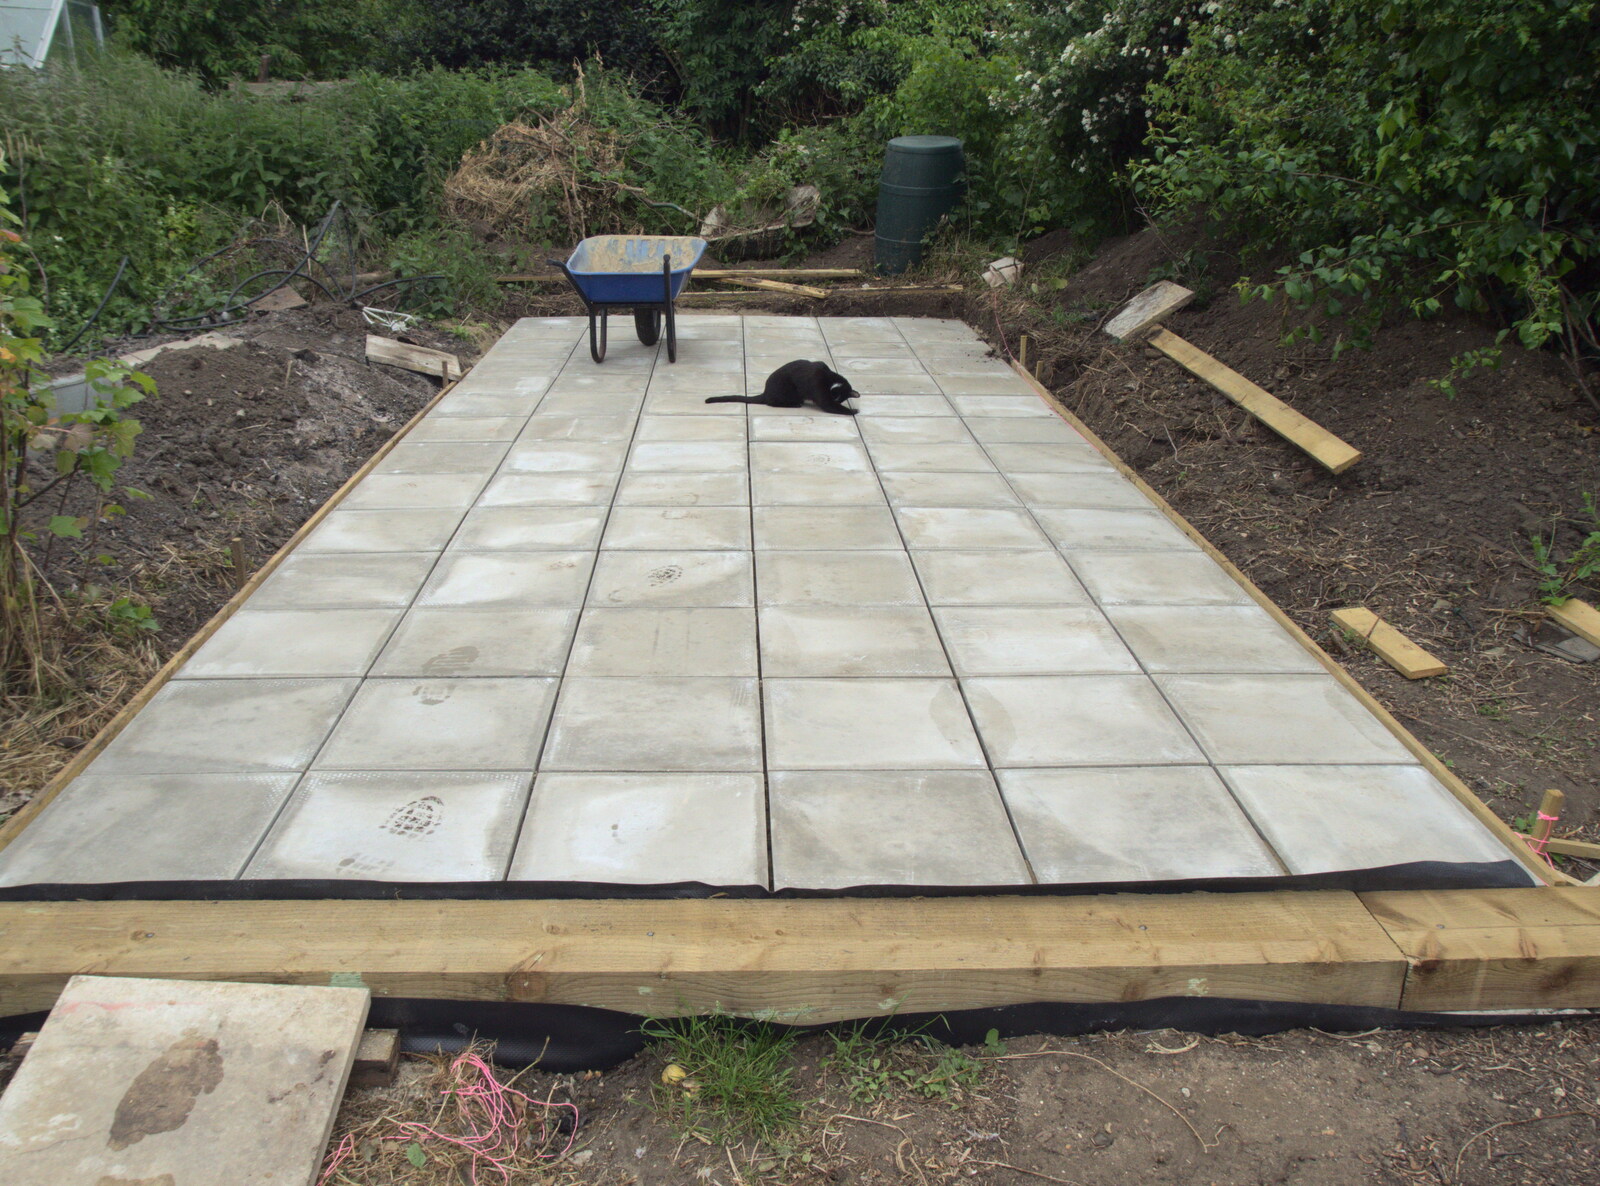 The greenhouse base is complete at last from A Quest for the Fabled Swimming Spot, Hoxne, Suffolk - 29th May 2023